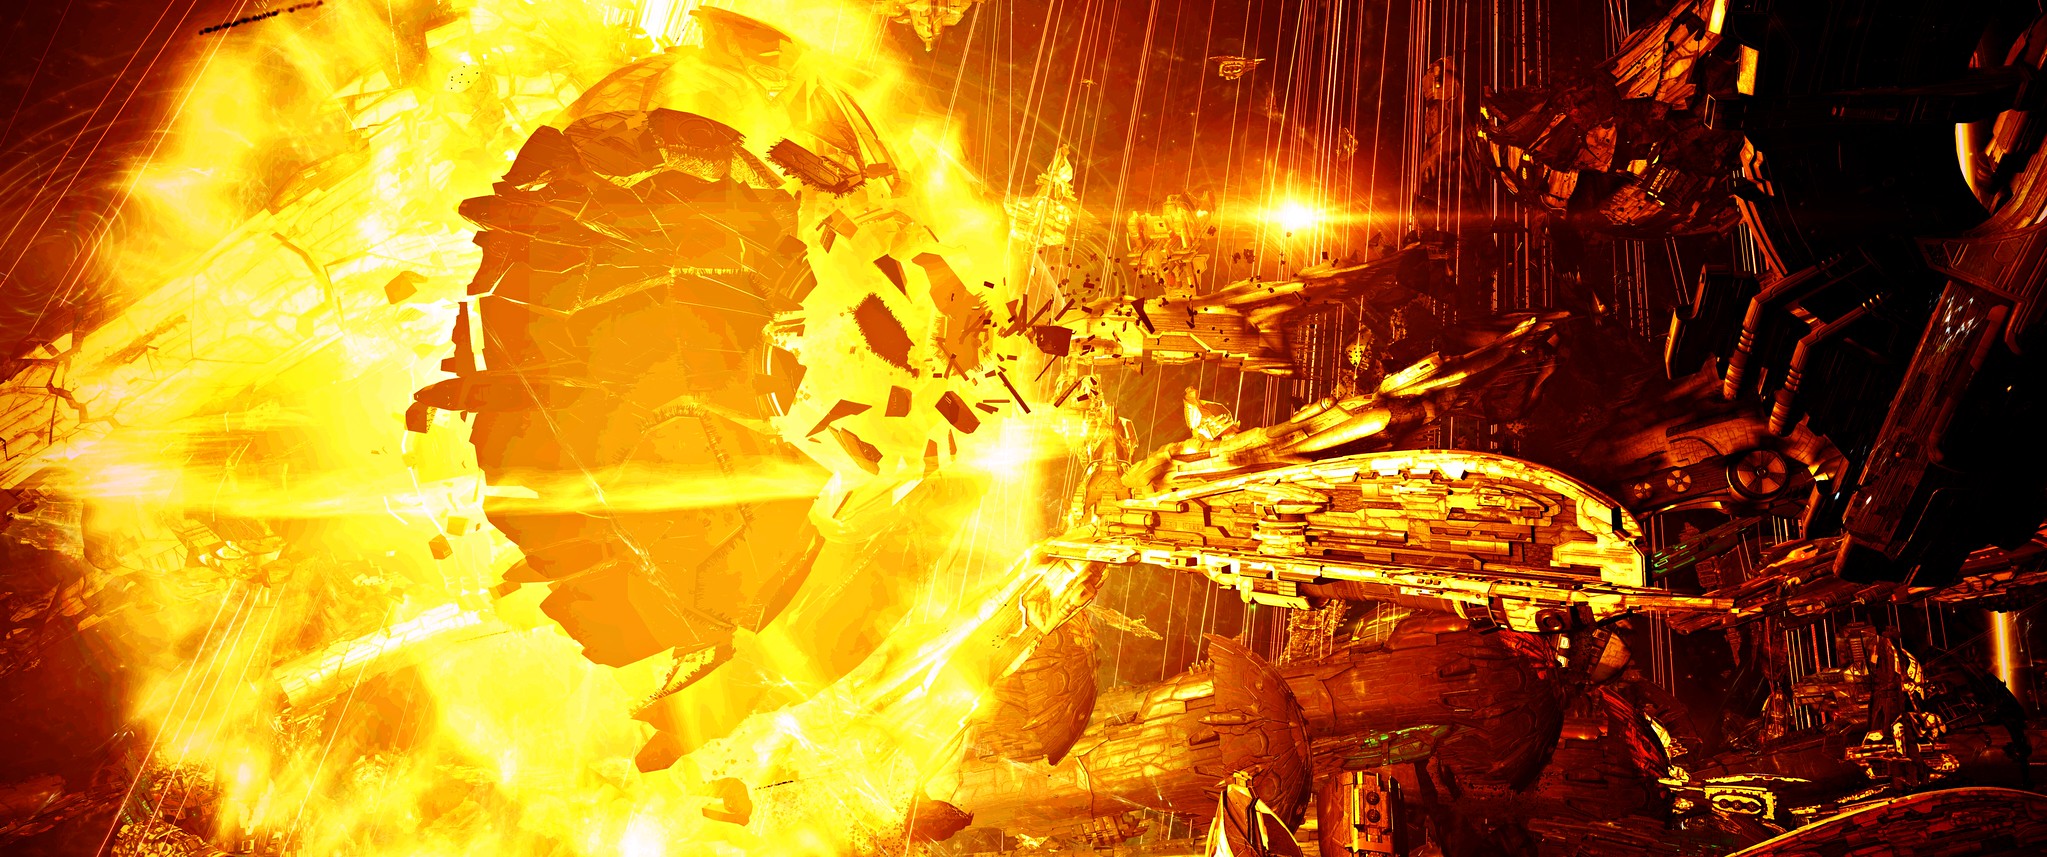 The previous Avatar-class Titan succumbing to sustained fire and Doomsday weapon fire. (Screenshot: Razorien EVE, Other)